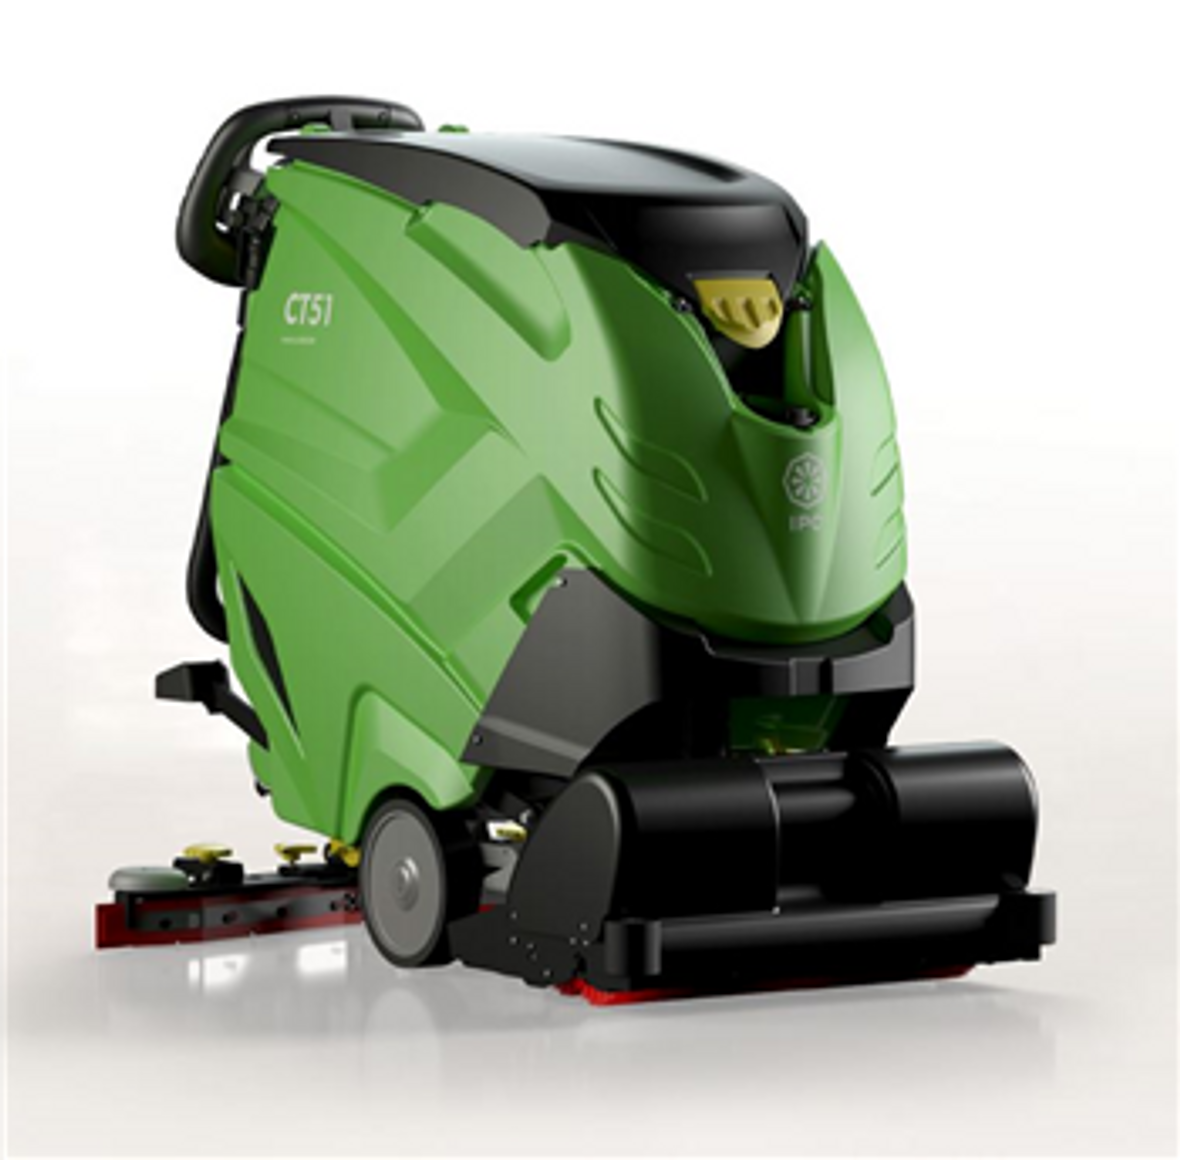 IPC Eagle CT51 XP55R  21" Automatic Scrubber, TRACTION DRIVE, Actuated Disc Scrub Head